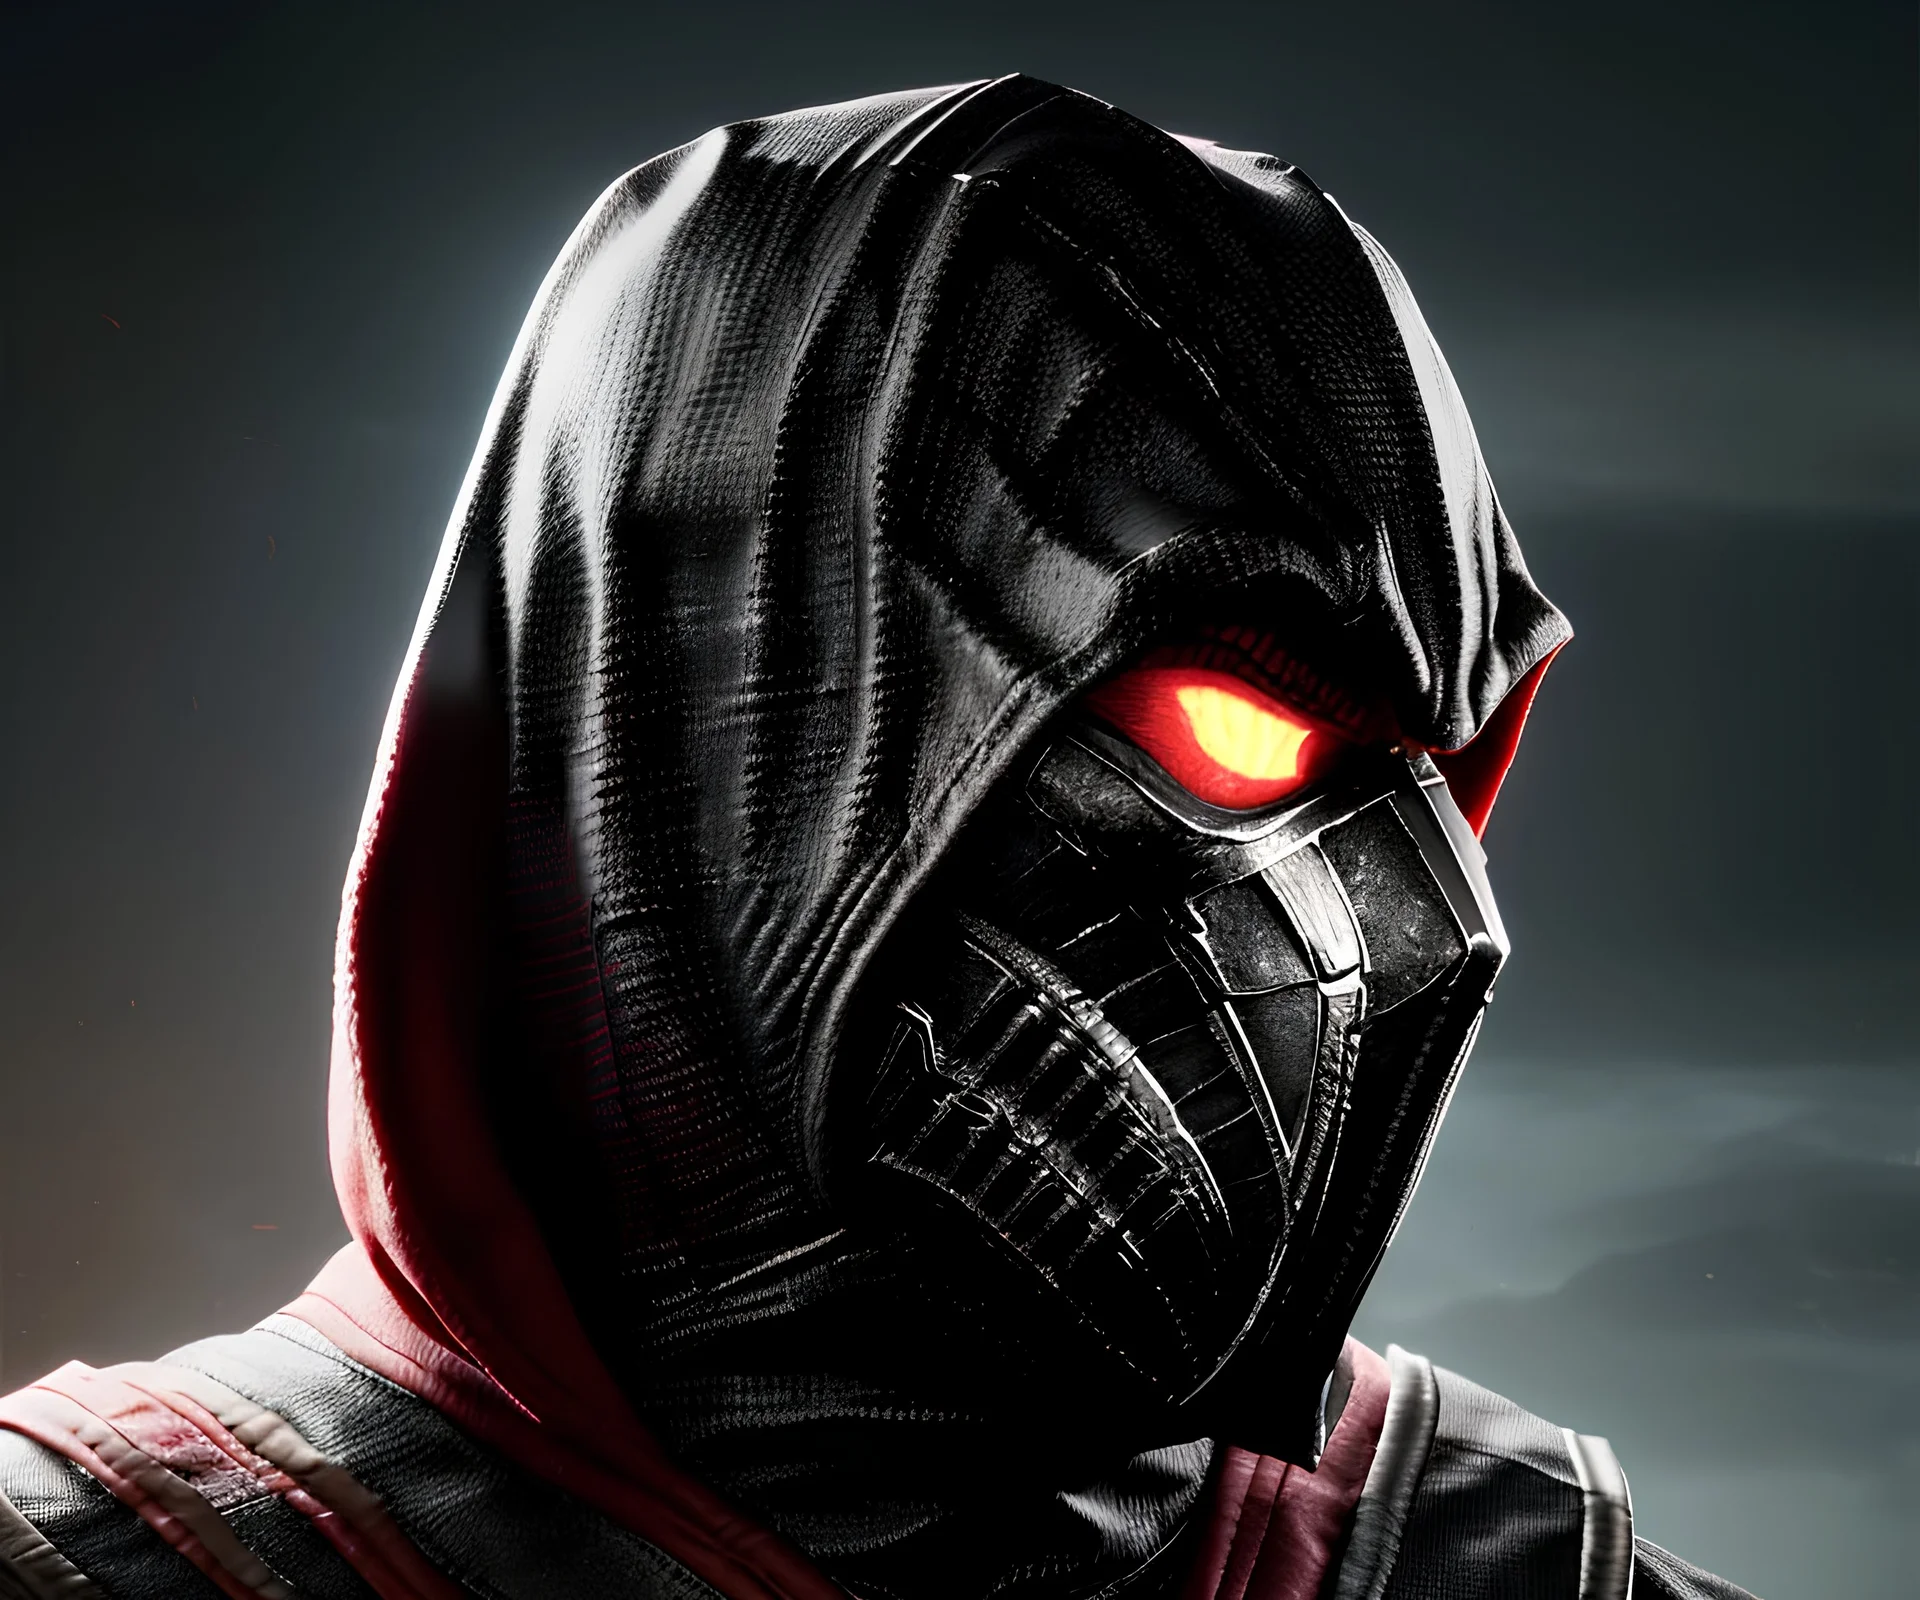 Ermac, mask cover whole face and hood , mortal kombat 11, highly detailed, hyper-detailed, beautifully color-coded, insane details, intricate details, beautifully color graded, Cinematic, Color Grading, Editorial Photography, Depth of Field, DOF, Tilt Blur, White Balance, 32k, Super-Resolution, Megapixel, ProPhoto RGB, VR, Half rear Lighting, Backlight, non photorealistic rendering